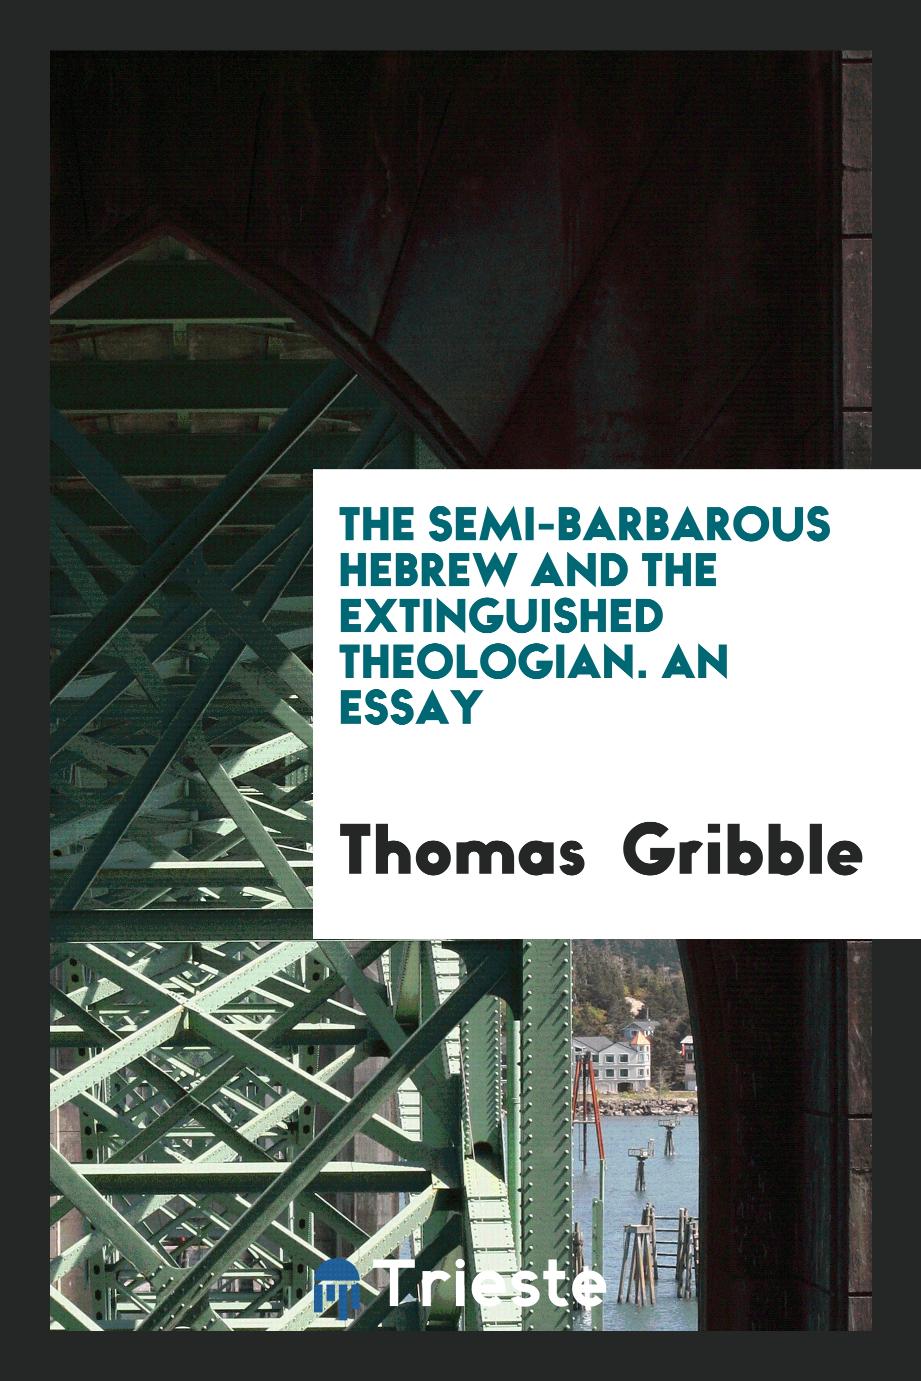 The Semi-Barbarous Hebrew and the Extinguished Theologian. An Essay